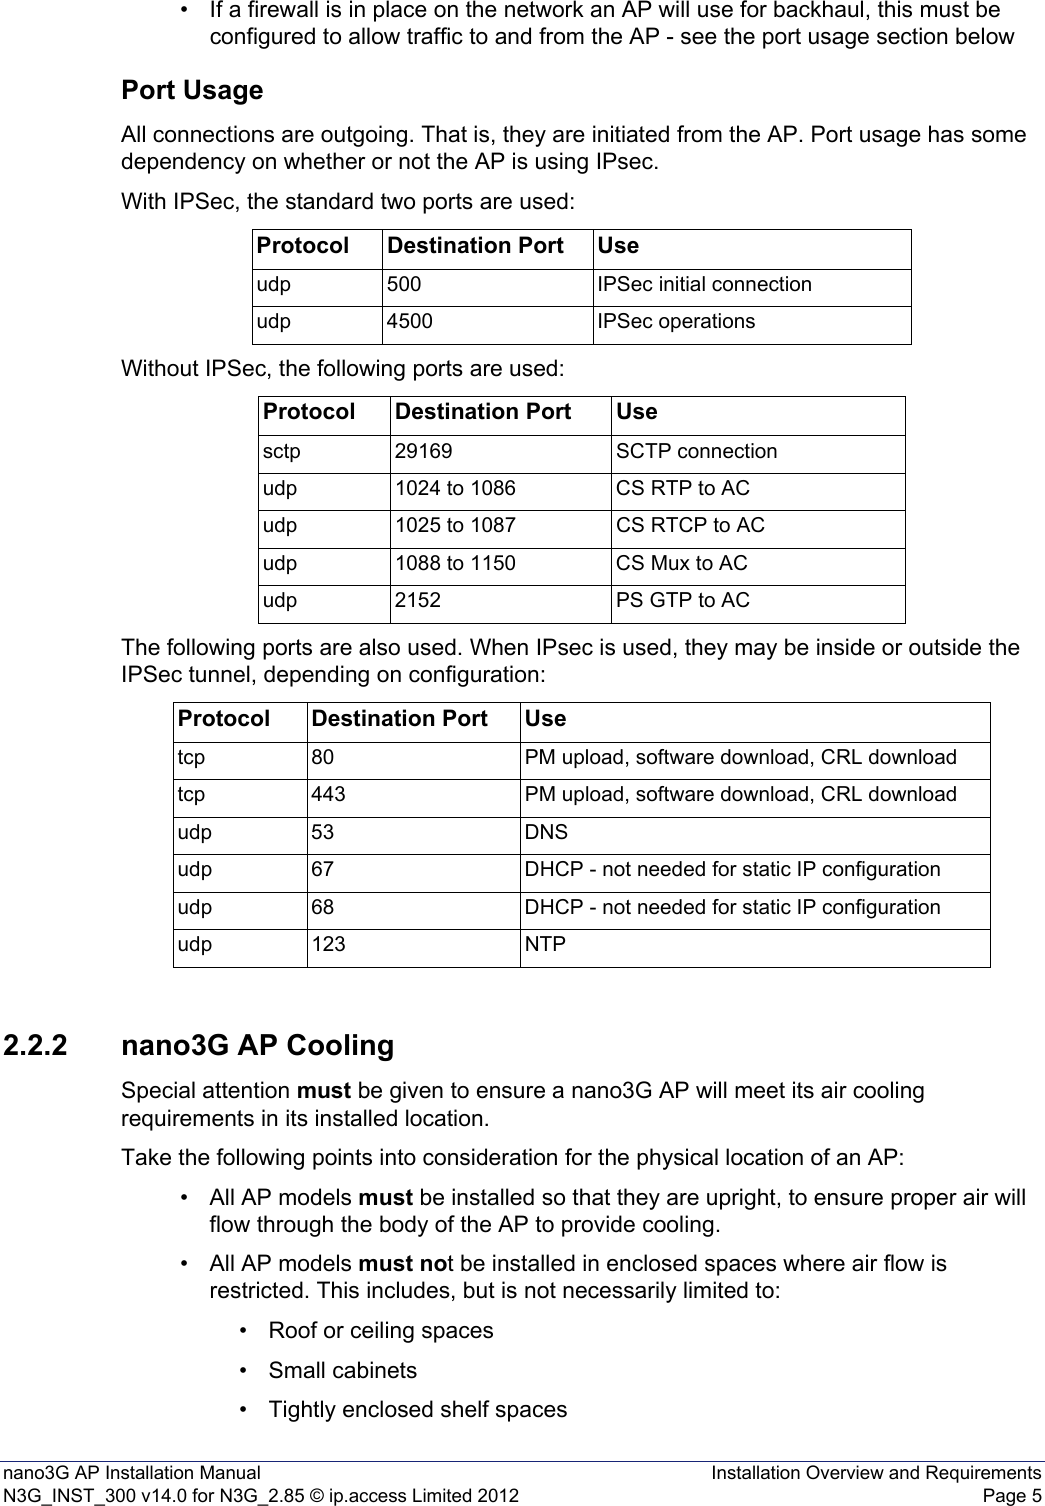 nano3G AP Installation Manual Installation Overview and RequirementsN3G_INST_300 v14.0 for N3G_2.85 © ip.access Limited 2012 Page 5• If a firewall is in place on the network an AP will use for backhaul, this must be configured to allow traffic to and from the AP - see the port usage section below Port UsageAll connections are outgoing. That is, they are initiated from the AP. Port usage has some dependency on whether or not the AP is using IPsec.With IPSec, the standard two ports are used:Without IPSec, the following ports are used:The following ports are also used. When IPsec is used, they may be inside or outside the IPSec tunnel, depending on configuration:2.2.2 nano3G AP CoolingSpecial attention must be given to ensure a nano3G AP will meet its air cooling requirements in its installed location. Take the following points into consideration for the physical location of an AP: • All AP models must be installed so that they are upright, to ensure proper air will flow through the body of the AP to provide cooling.• All AP models must not be installed in enclosed spaces where air flow is restricted. This includes, but is not necessarily limited to:• Roof or ceiling spaces• Small cabinets• Tightly enclosed shelf spacesProtocol Destination Port Useudp 500 IPSec initial connectionudp 4500 IPSec operationsProtocol Destination Port Usesctp 29169 SCTP connectionudp 1024 to 1086 CS RTP to ACudp 1025 to 1087 CS RTCP to ACudp 1088 to 1150 CS Mux to ACudp 2152 PS GTP to ACProtocol Destination Port Usetcp 80 PM upload, software download, CRL downloadtcp 443 PM upload, software download, CRL downloadudp 53 DNSudp 67 DHCP - not needed for static IP configurationudp 68 DHCP - not needed for static IP configurationudp 123 NTP